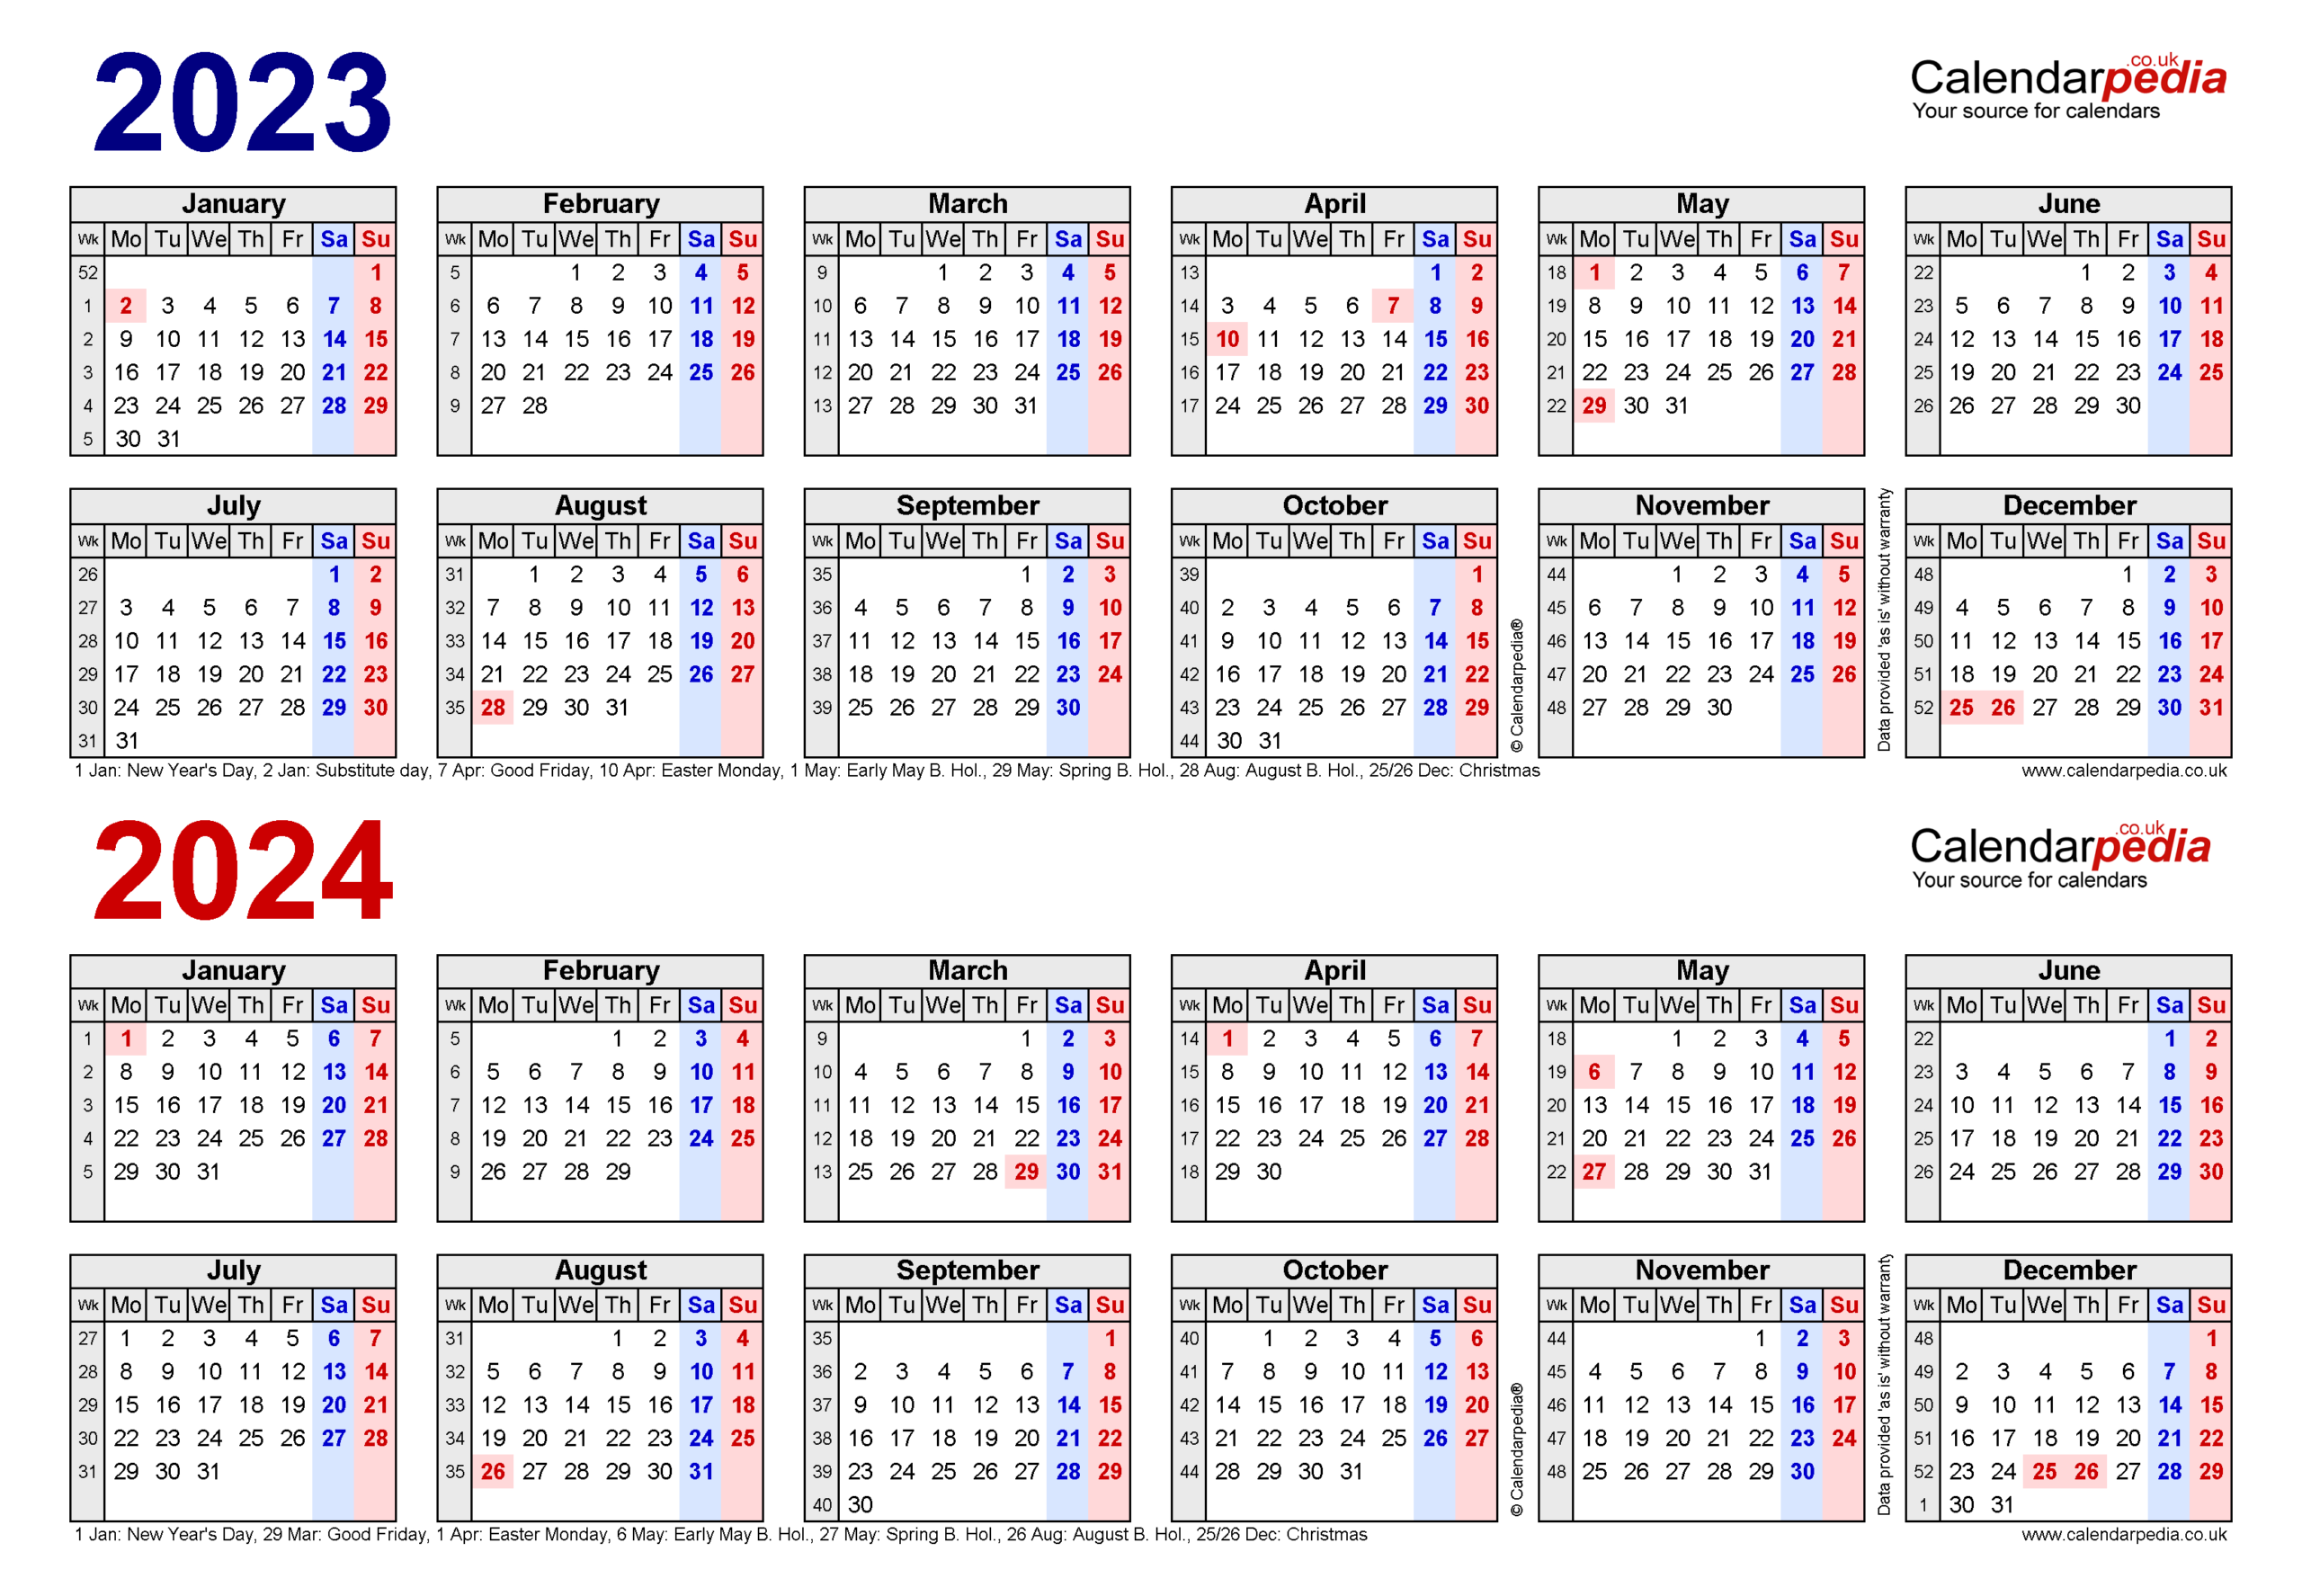 Two Year Calendars For 2023 &amp; 2024 (Uk) For Pdf inside Free Calendar Pdf States United